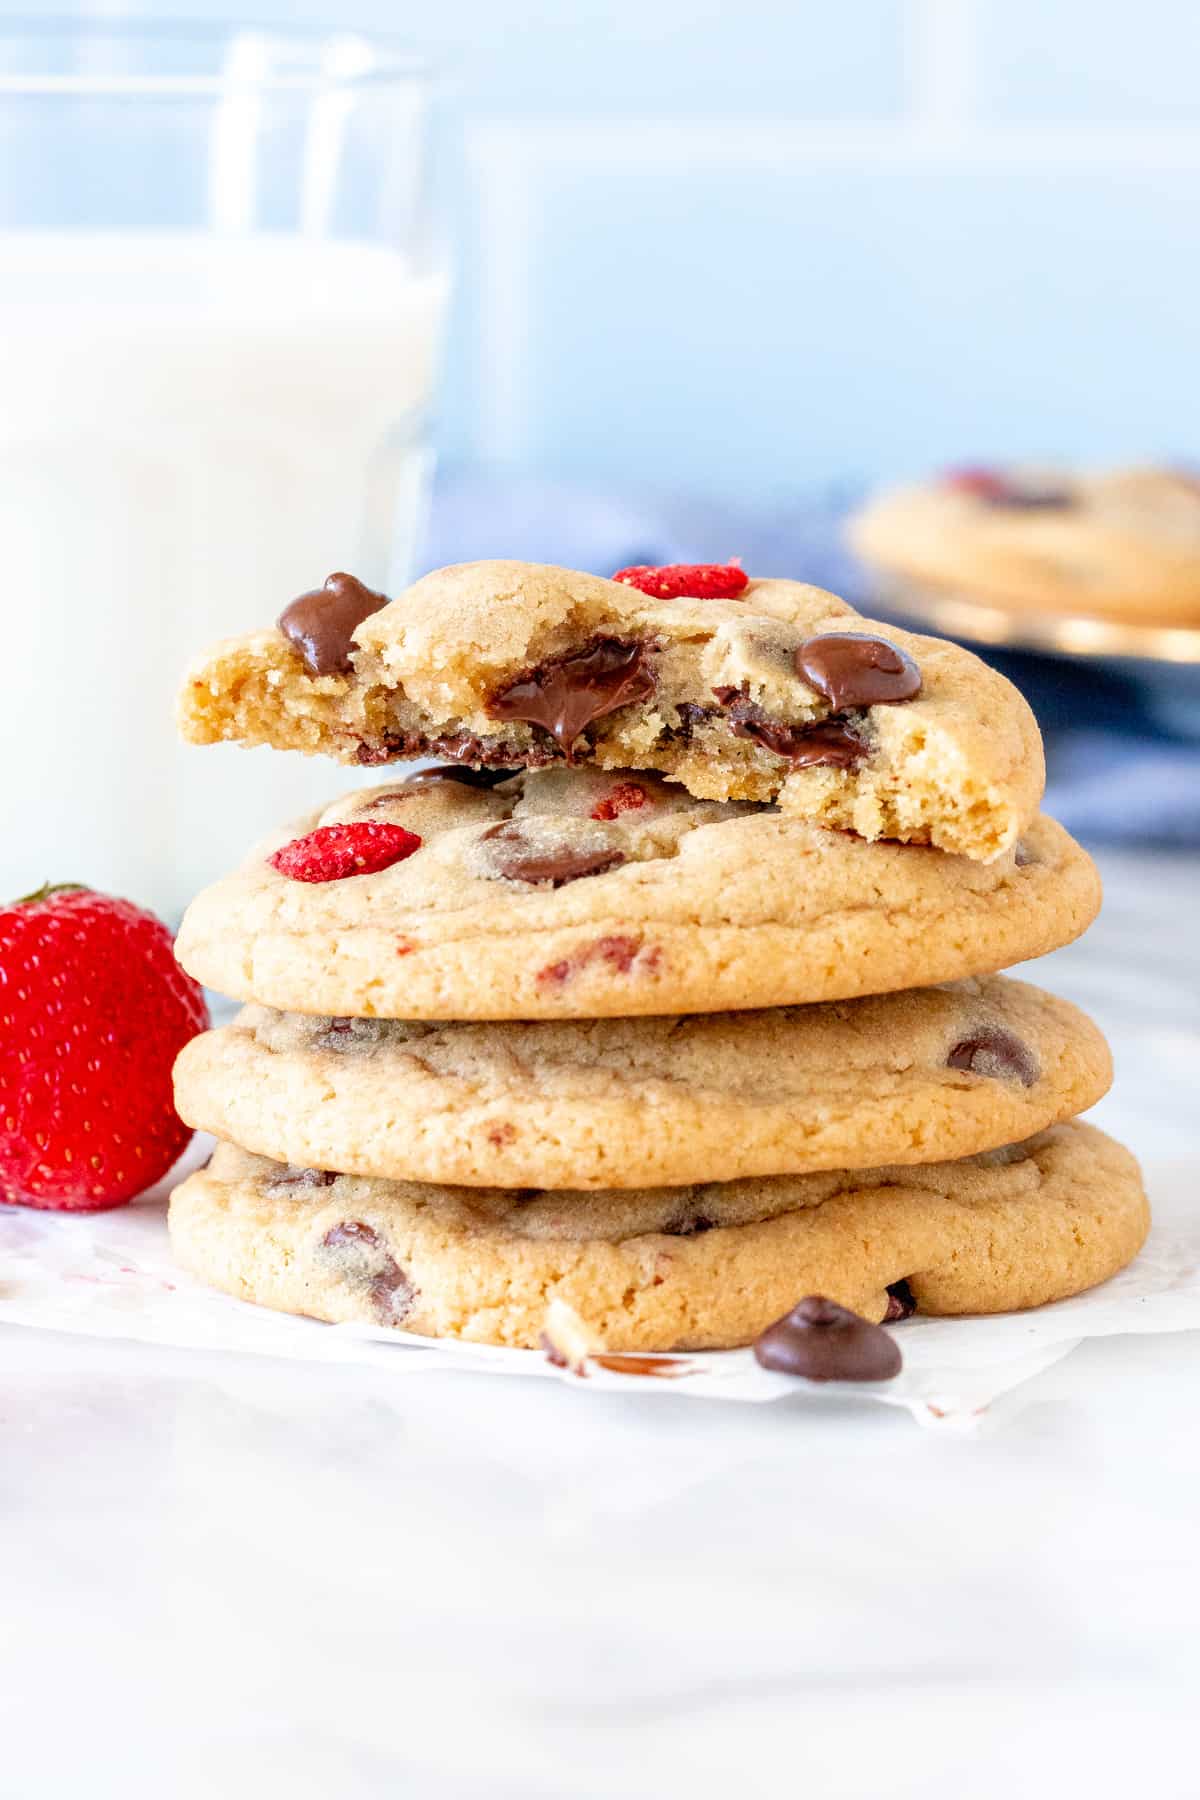 Stack of strawberry chocolate chip cookies, with top cookie broken in half